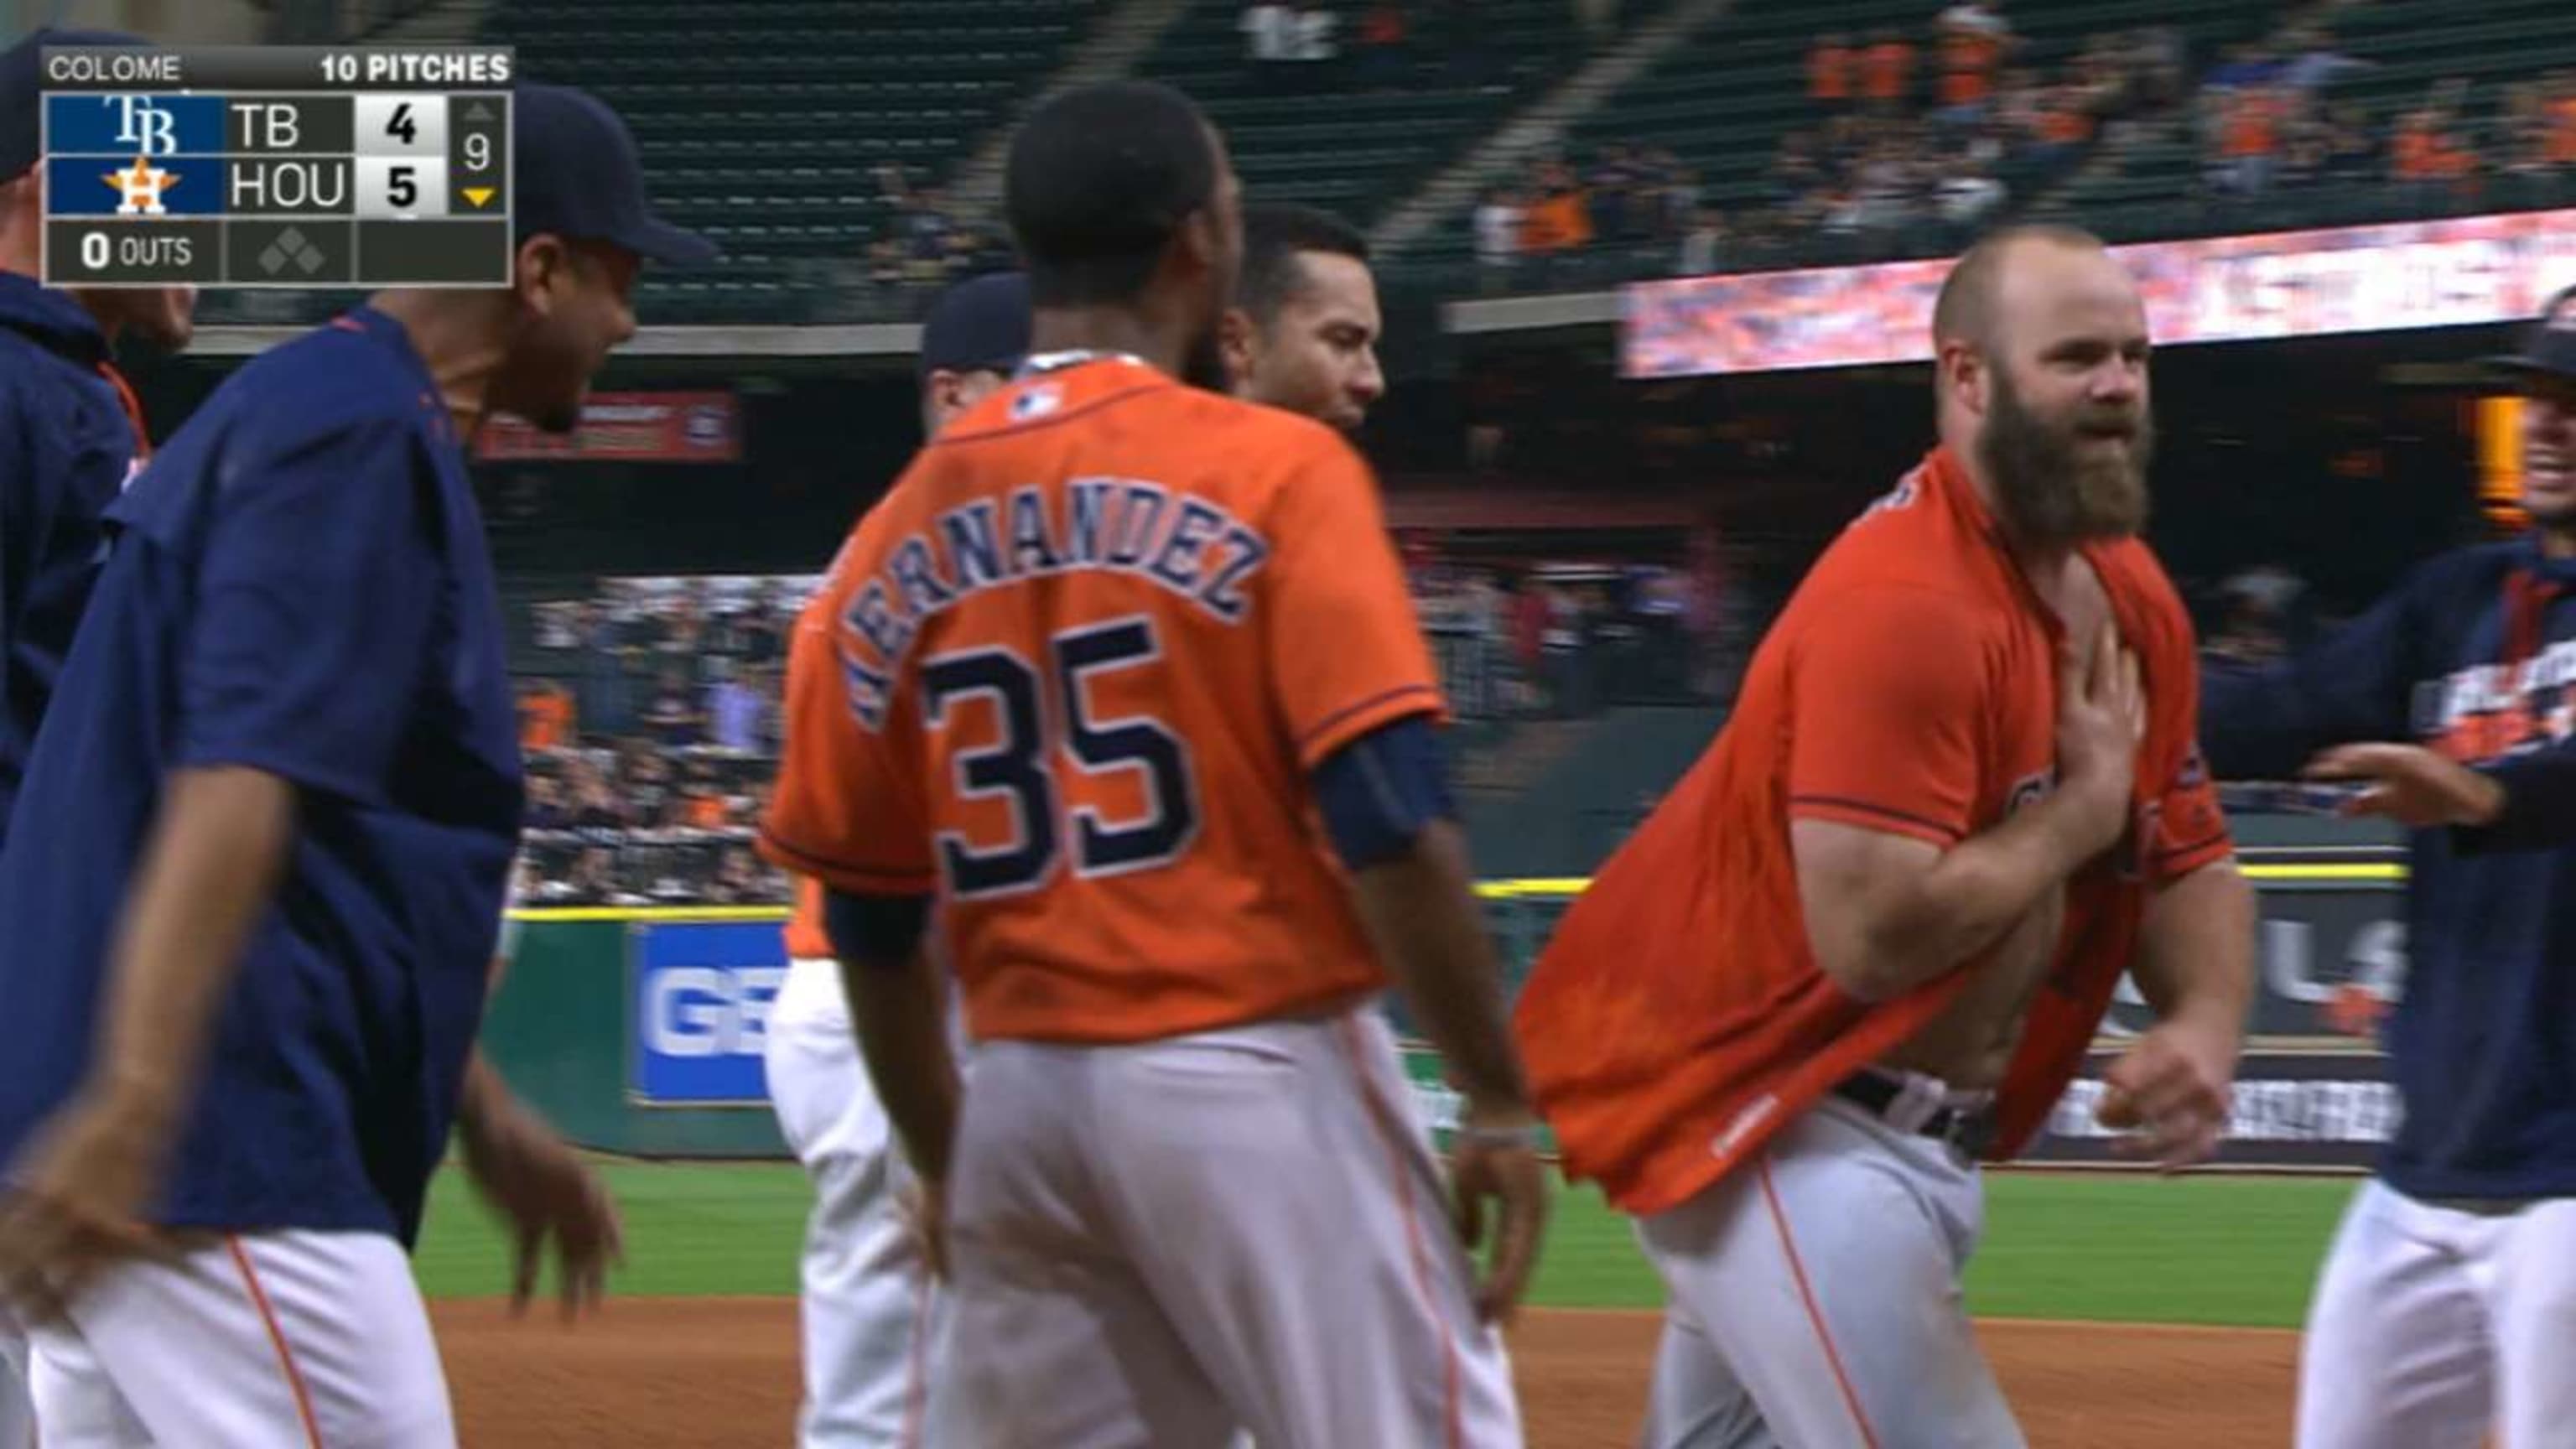 Let's all watch Evan Gattis homer on a pitch he had no business